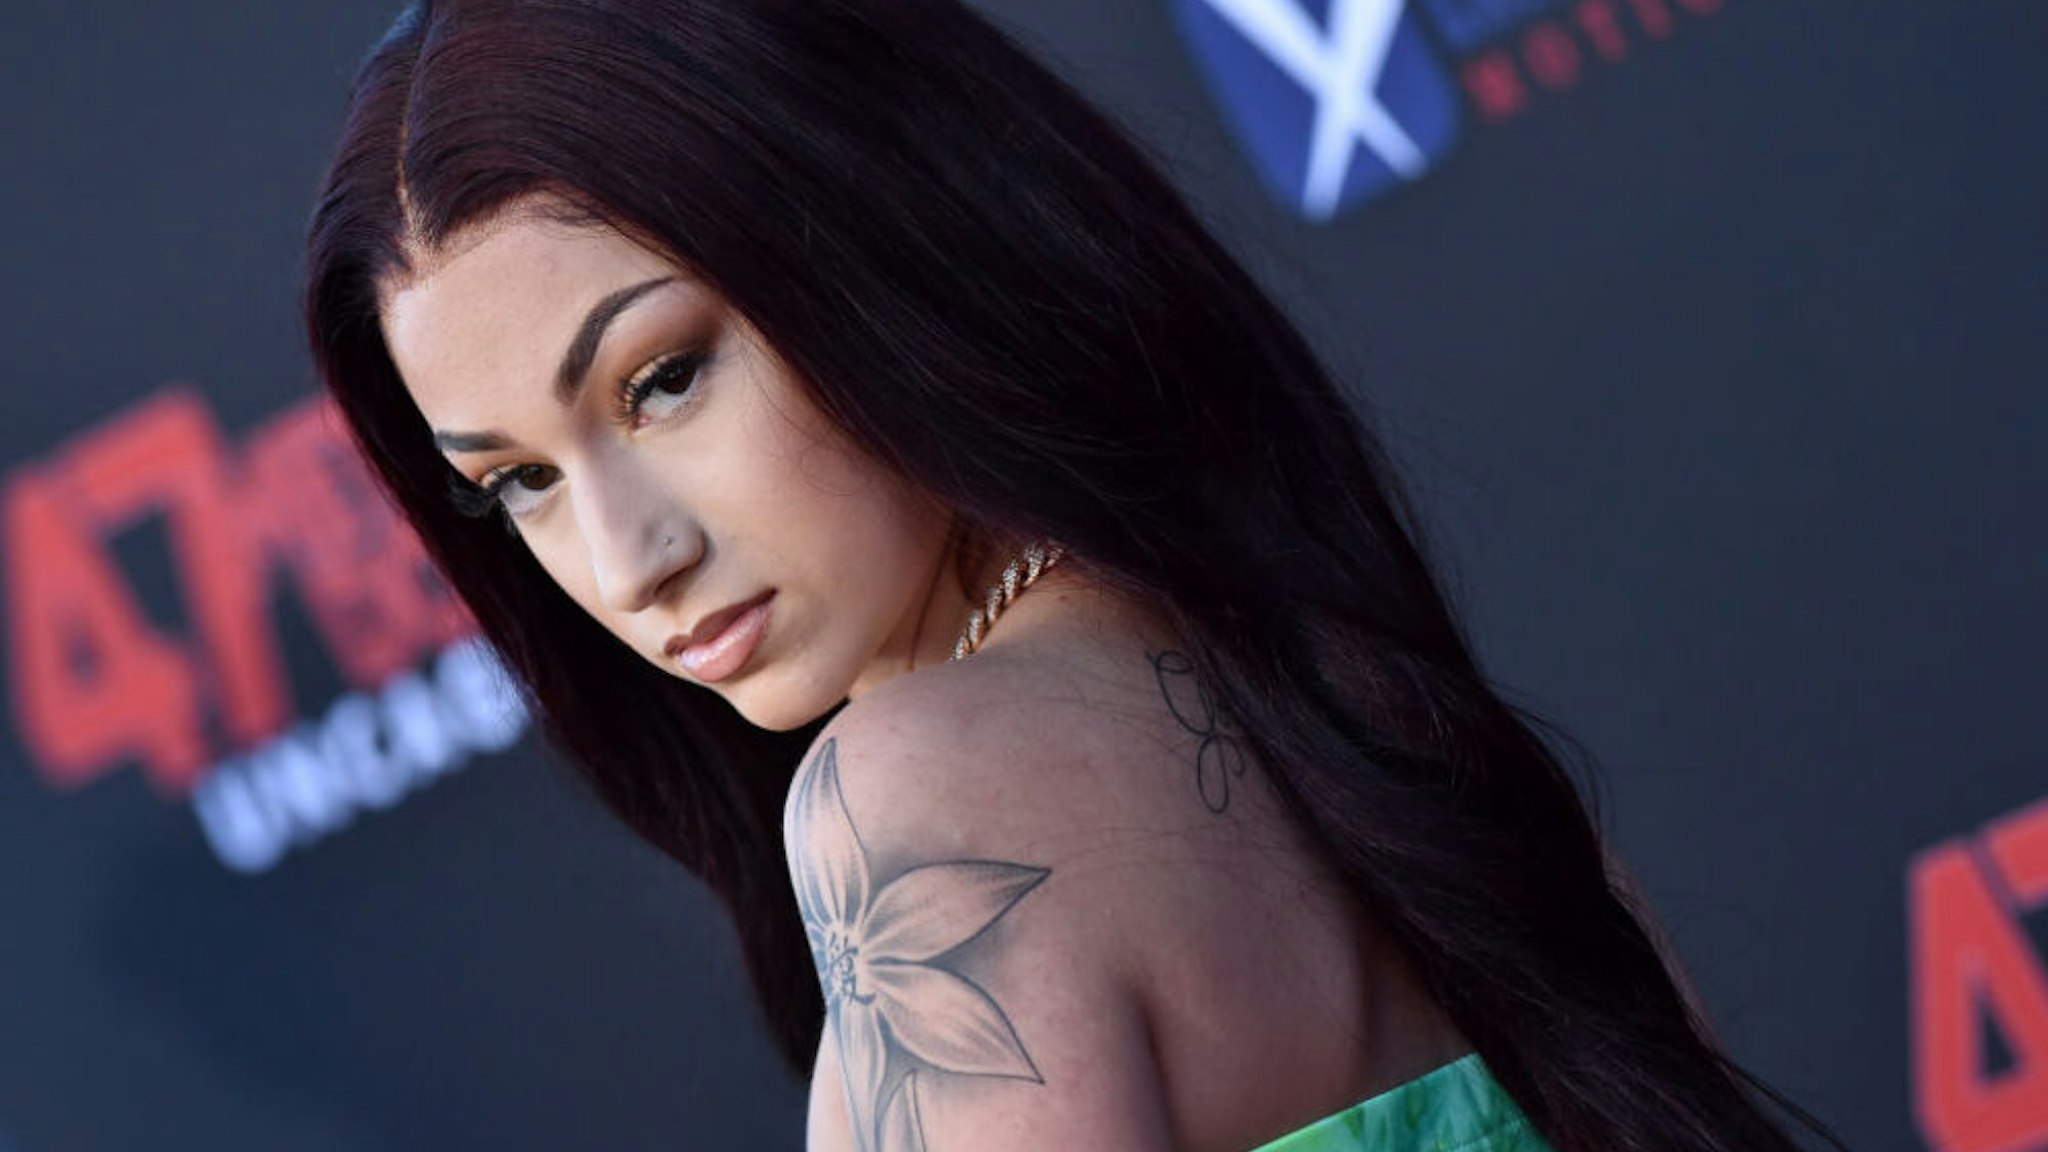 WESTWOOD, CALIFORNIA - AUGUST 13: Danielle Bregoli attends the LA Premiere of Entertainment Studios' "47 Meters Down Uncaged" at Regency Village Theatre on August 13, 2019 in Westwood, California.